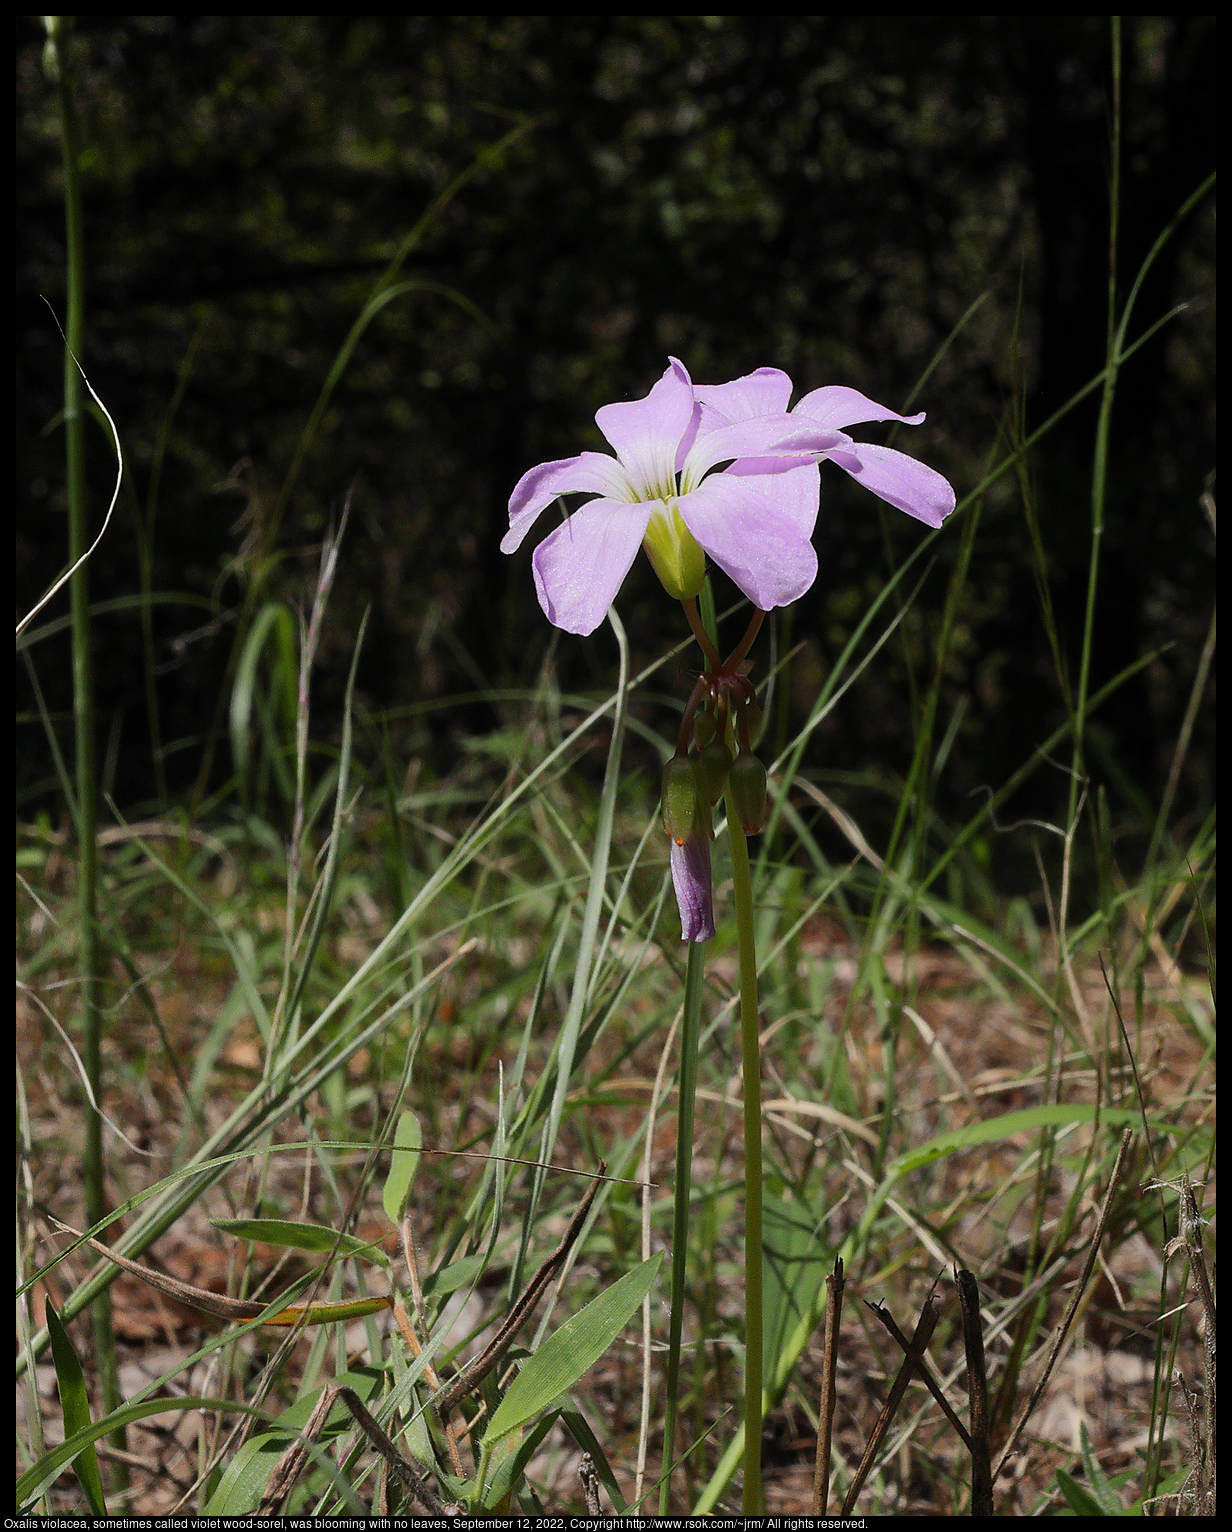 Oxalis violacea, sometimes called violet wood-sorel, was blooming with no leaves, September 12, 2022